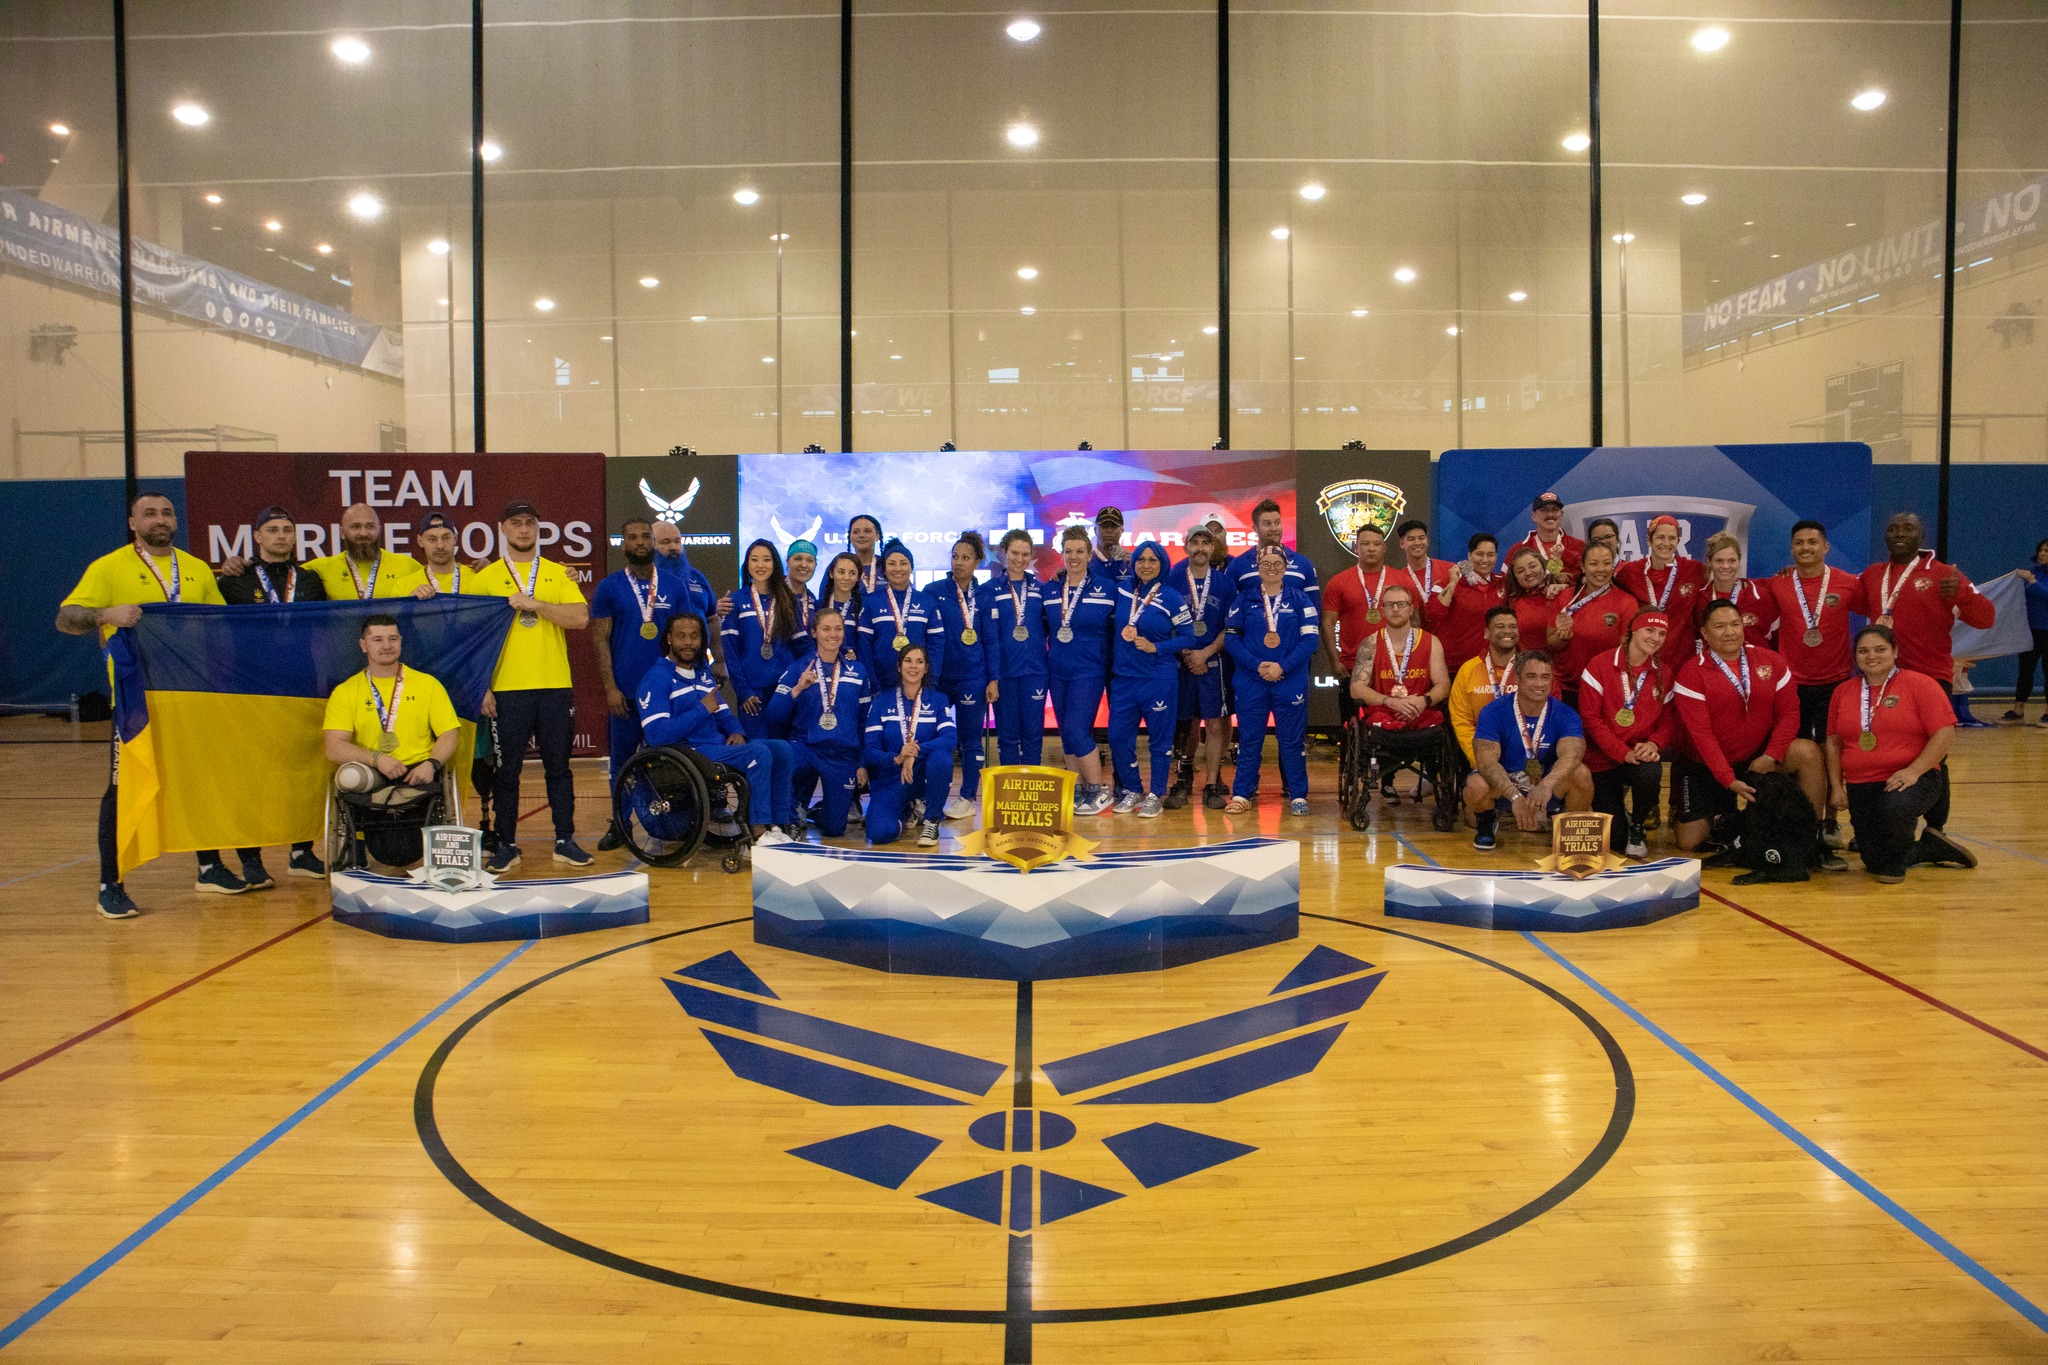 The Ukrainian national team achieved a record-breaking 76 medals at the United States Air Force Trials 2024